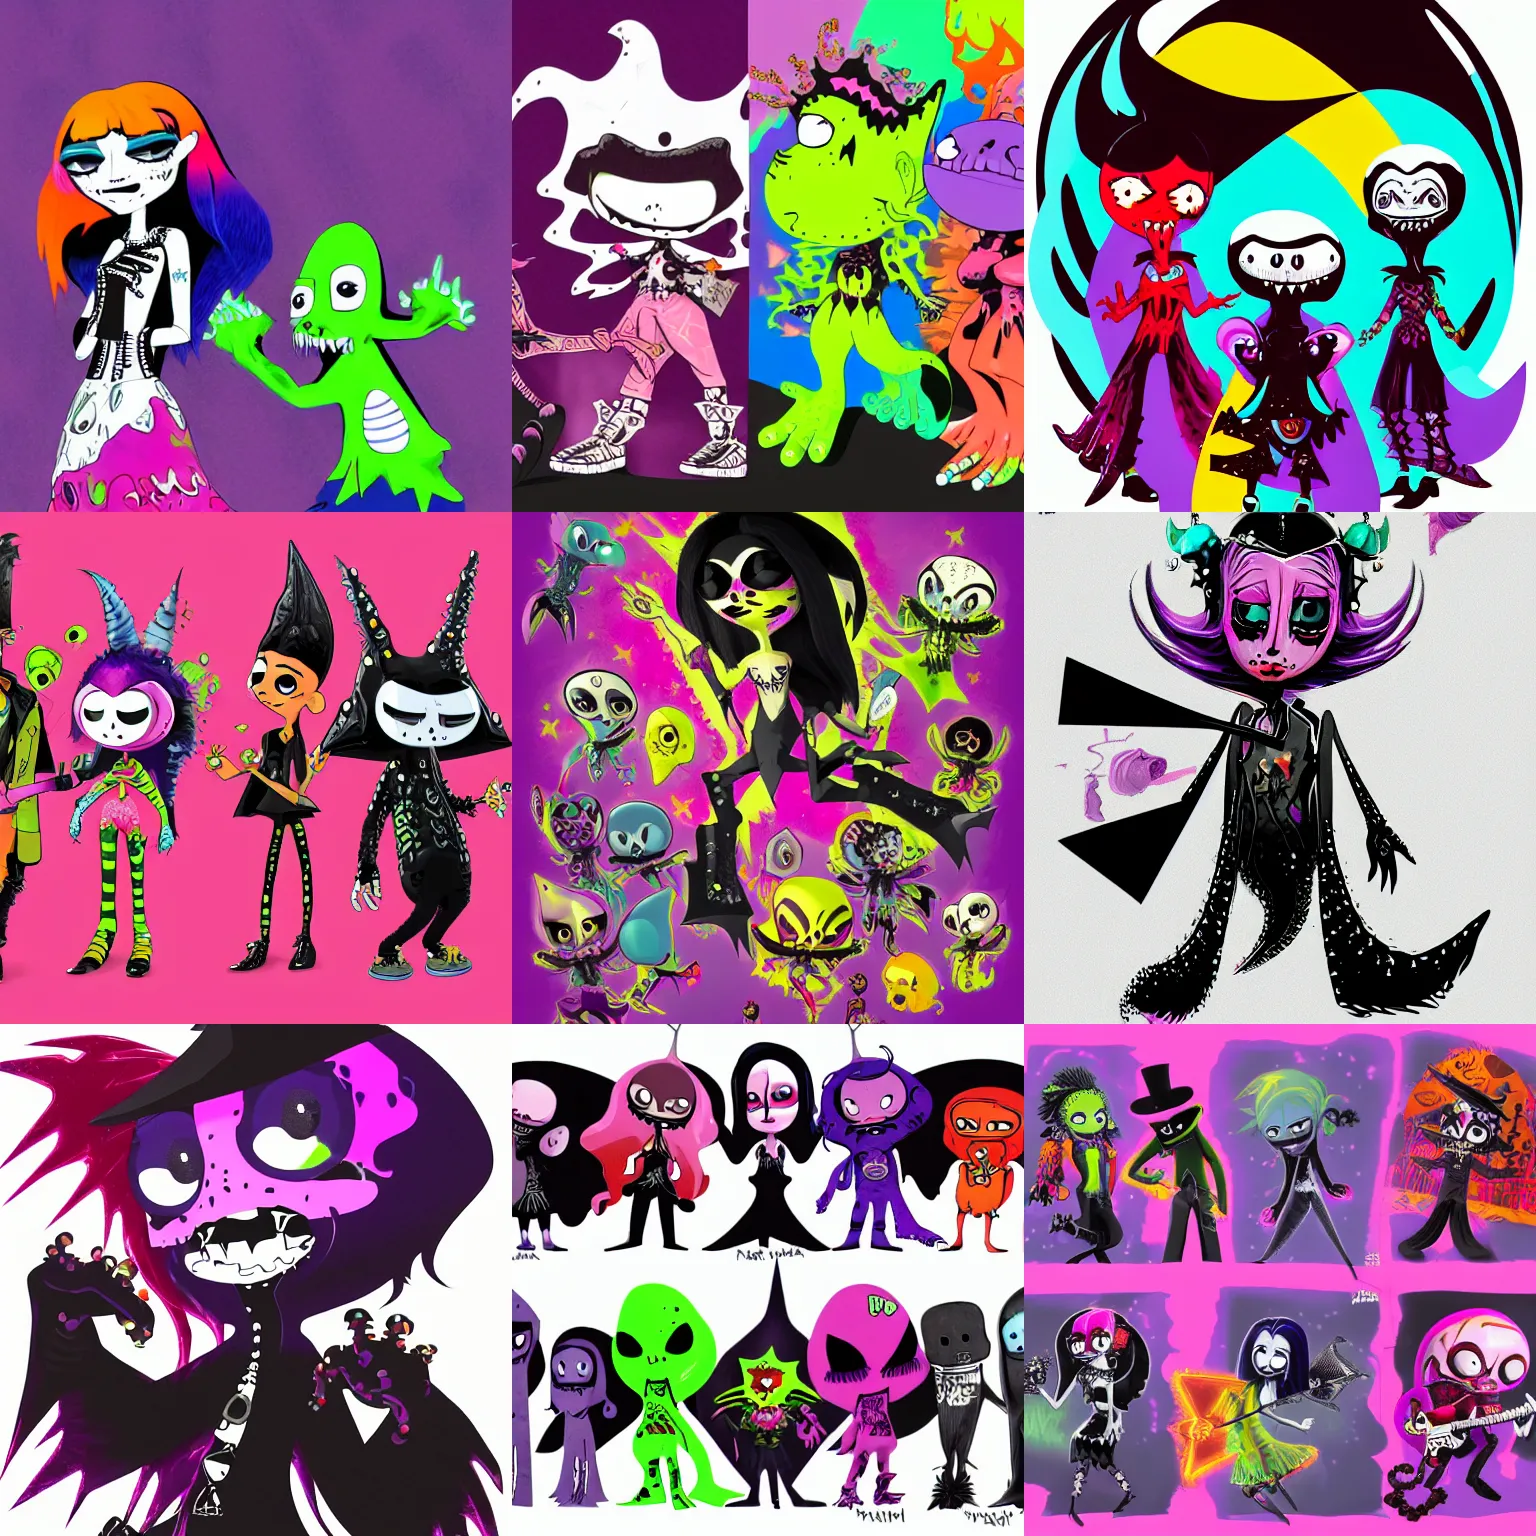 Prompt: lisa frank gothic punk vampiric rockstar vampire squid concept character designs of various shapes and sizes by genndy tartakovsky and the creators of fret nice at pieces interactive and splatoon by nintendo and the psychonauts by doublefine tim shafer artists for the new hotel transylvania film trending on art station